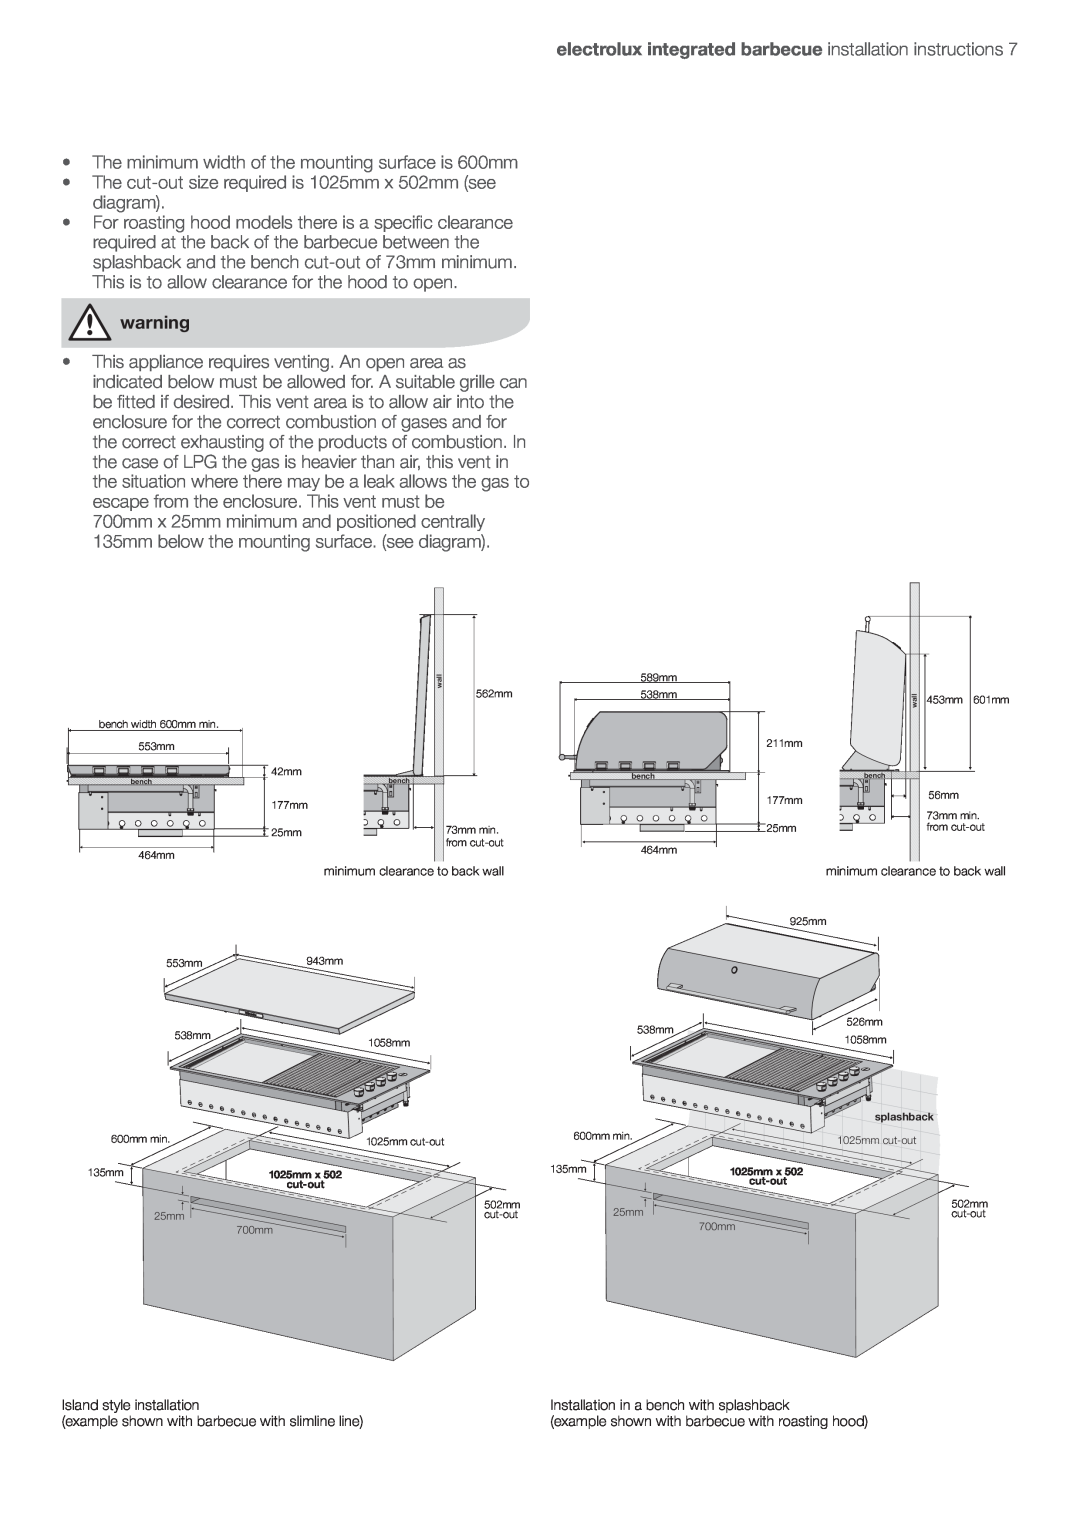 Electrolux EQBL100AS electrolux integrated barbecue installation instructions, diagram, Island style installation 